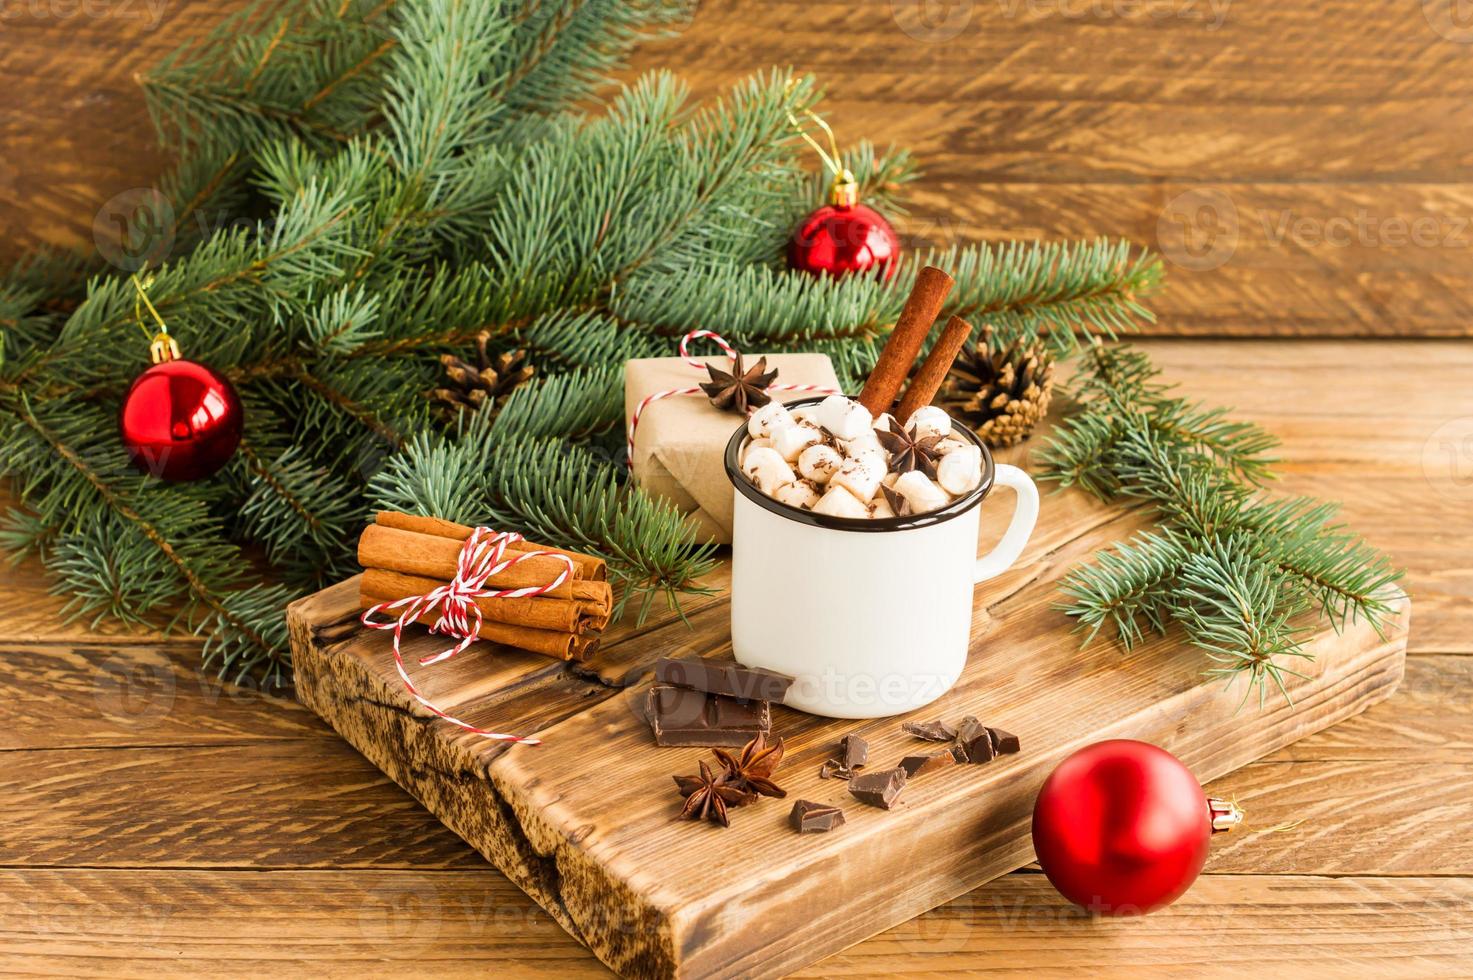 white enameled mug with hot chocolate or cocoa, pieces of chocolate and cinnamon sticks on a wooden board. the concept of a cozy Christmas. photo